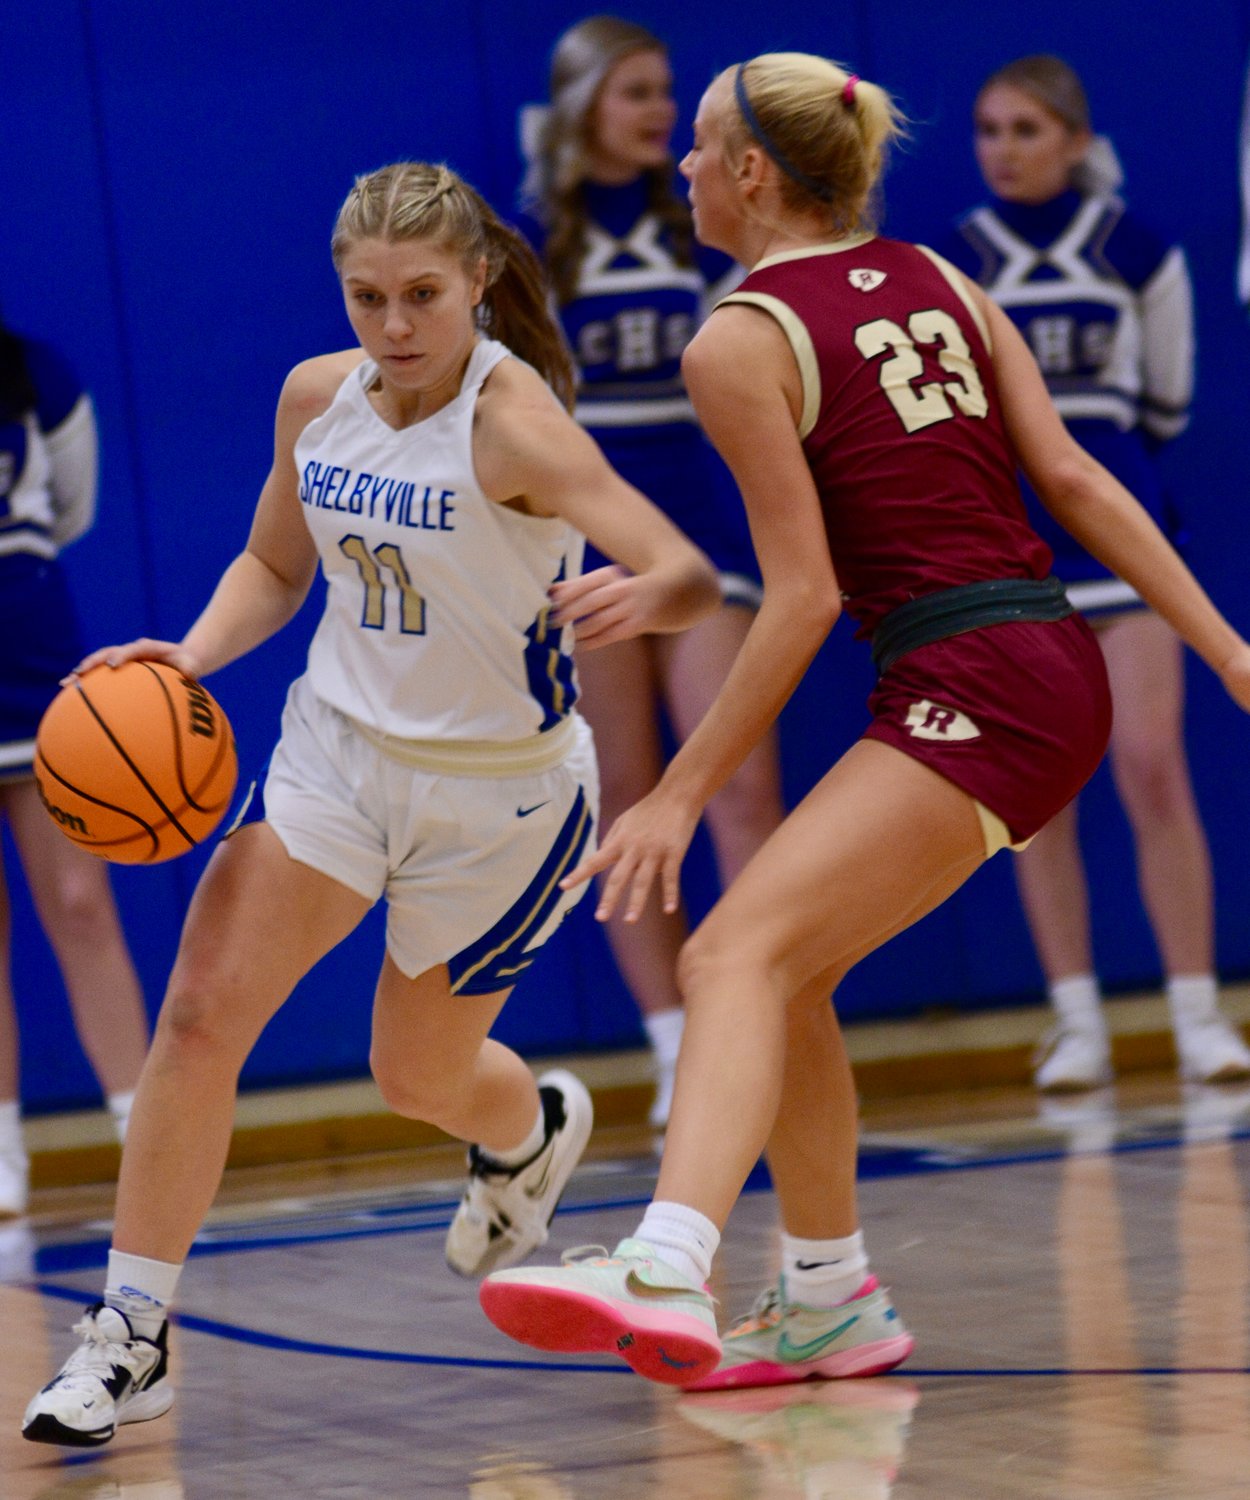 Shelbyville Central's Paige Blackburn led the way as the Golden Eaglettes rolled past visiting Riverdale forn the second time this season. Blackburn scored a game-high 26 points and knocked down six 3-pointers.